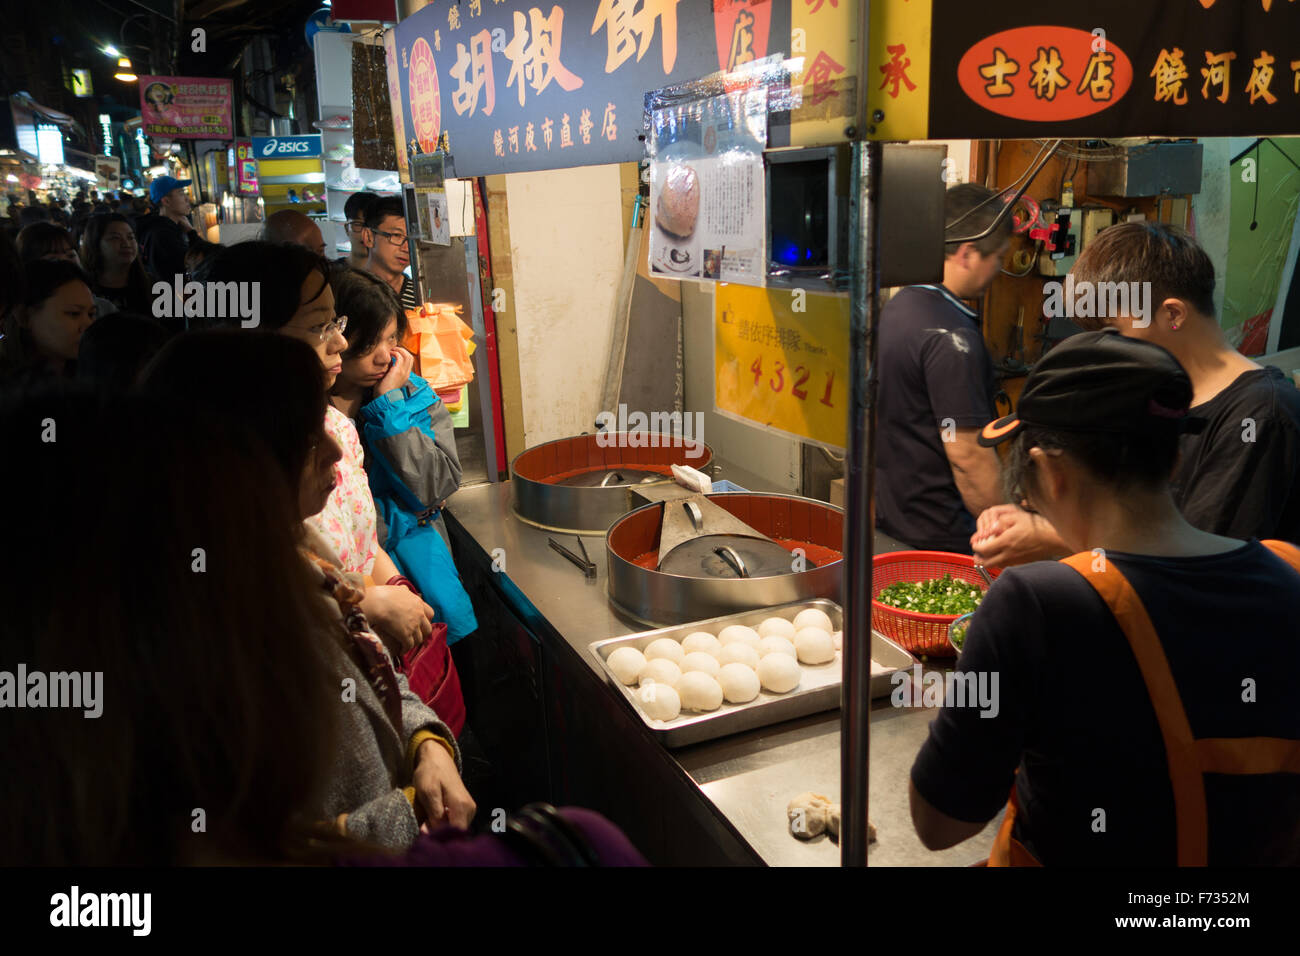 Asian Night Market street food foule Banque D'Images